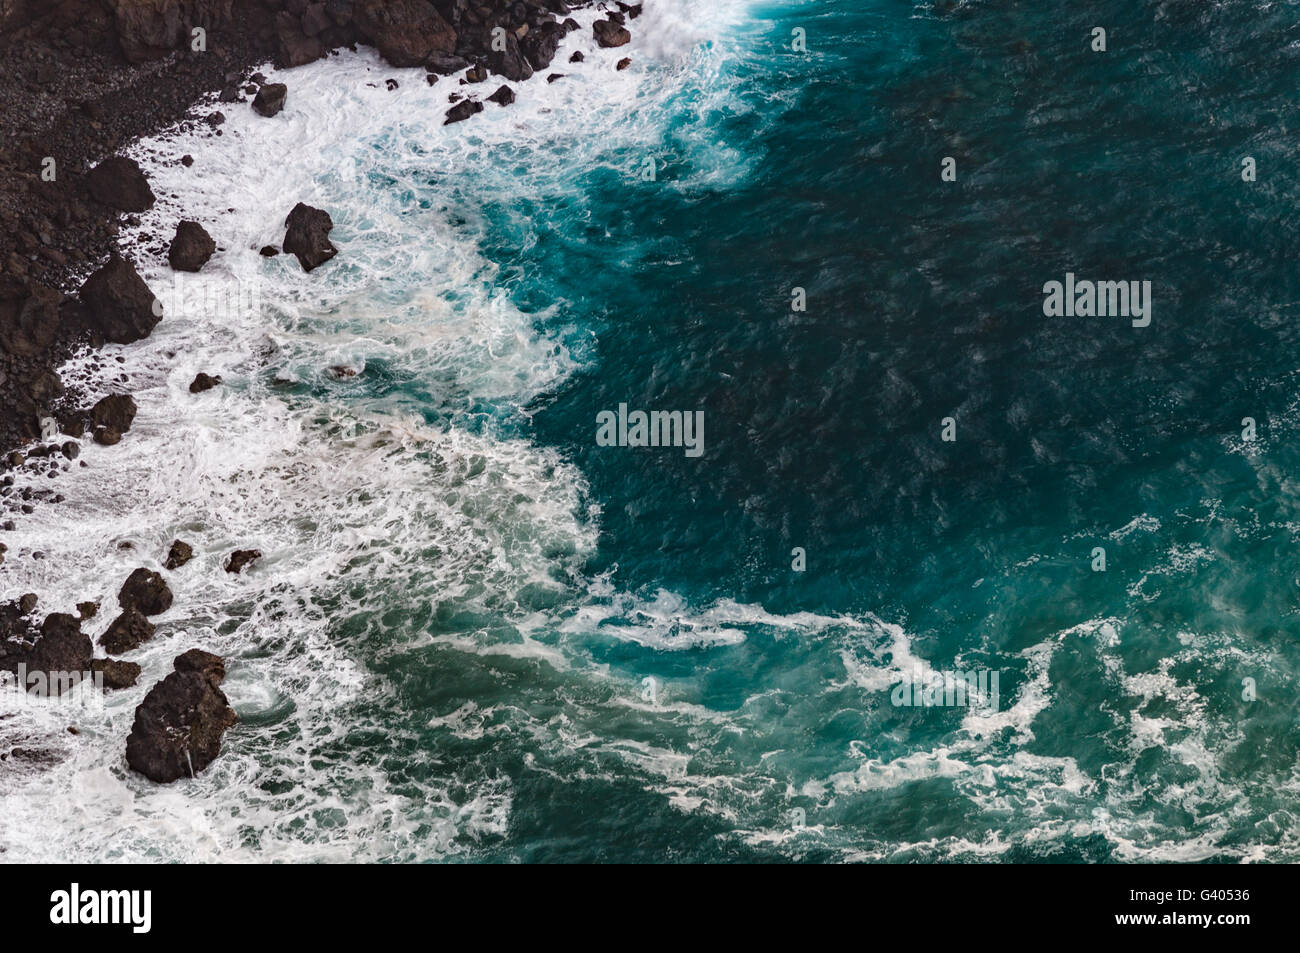 Danger rocky coast, stormy weather with large waves, from above view Stock Photo